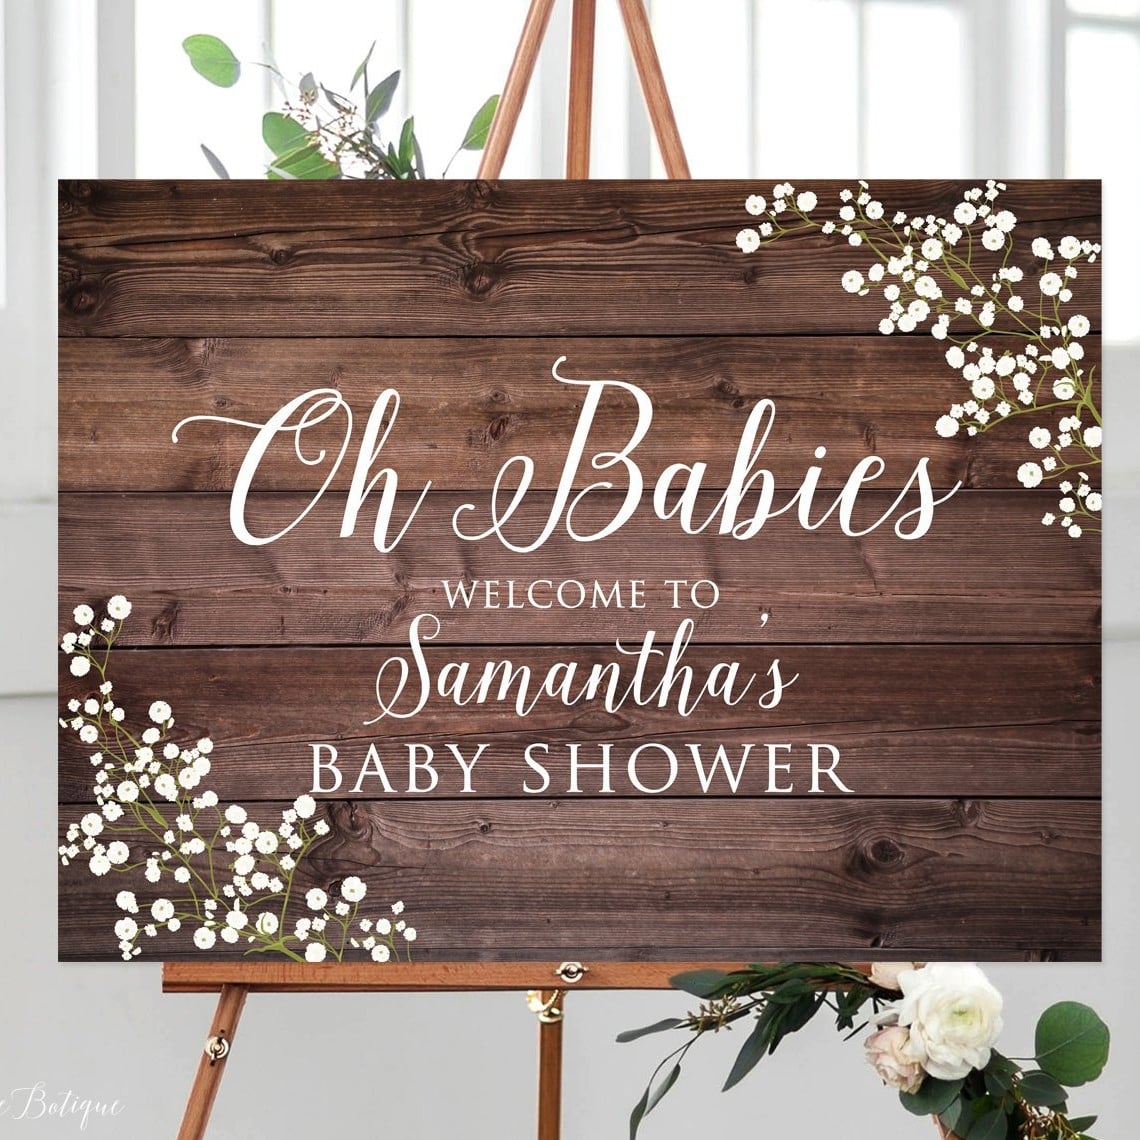 Twin Baby Shower Ideas | Family